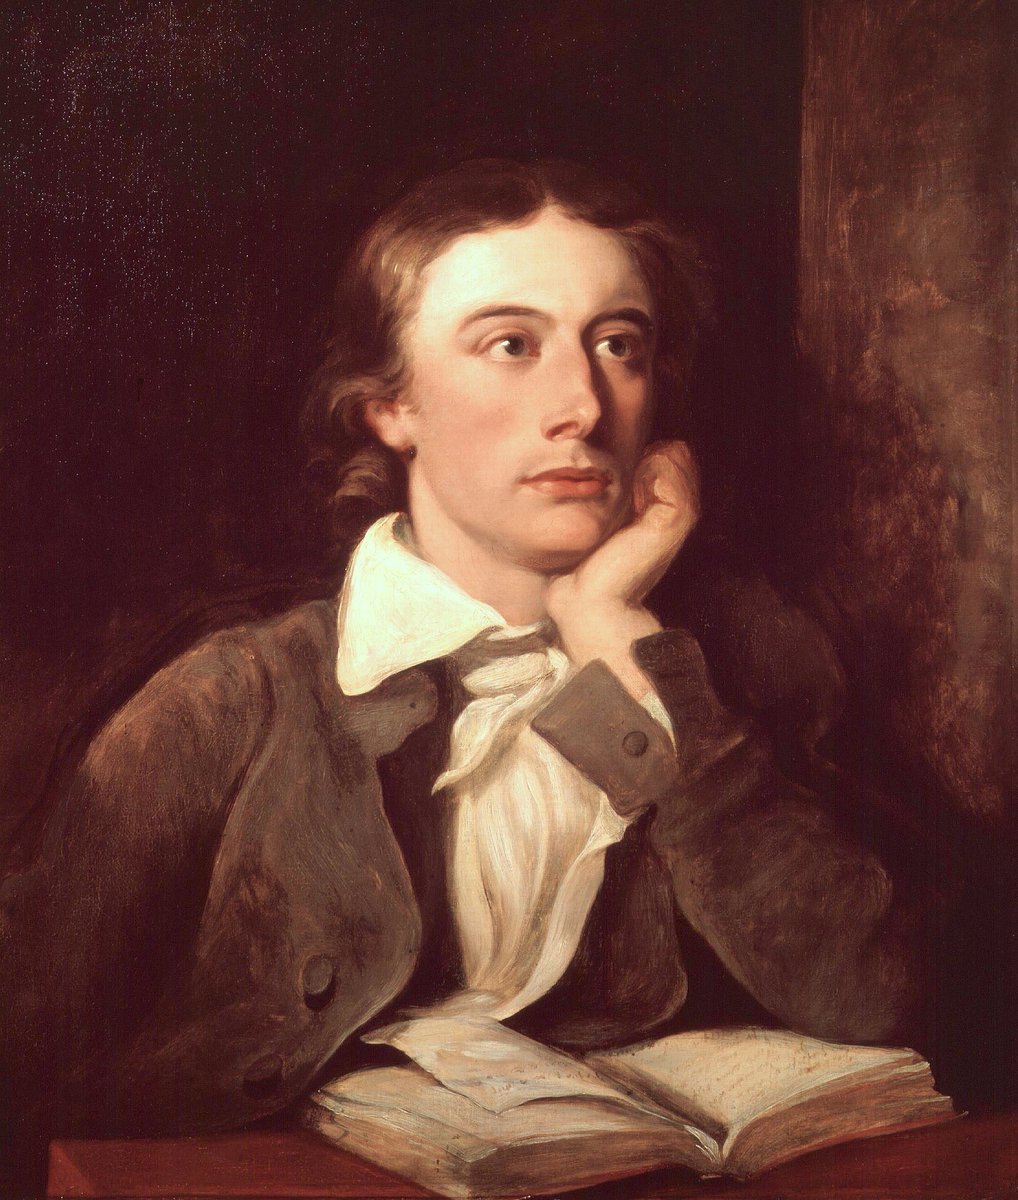 “Do you not see, how necessary a World of Pains and troubles is to school an Intelligence and make it a soul? ... Call the world if you Please ‘The vale of Soul-making.’ ”         ~ John Keats   #BOTD 1795